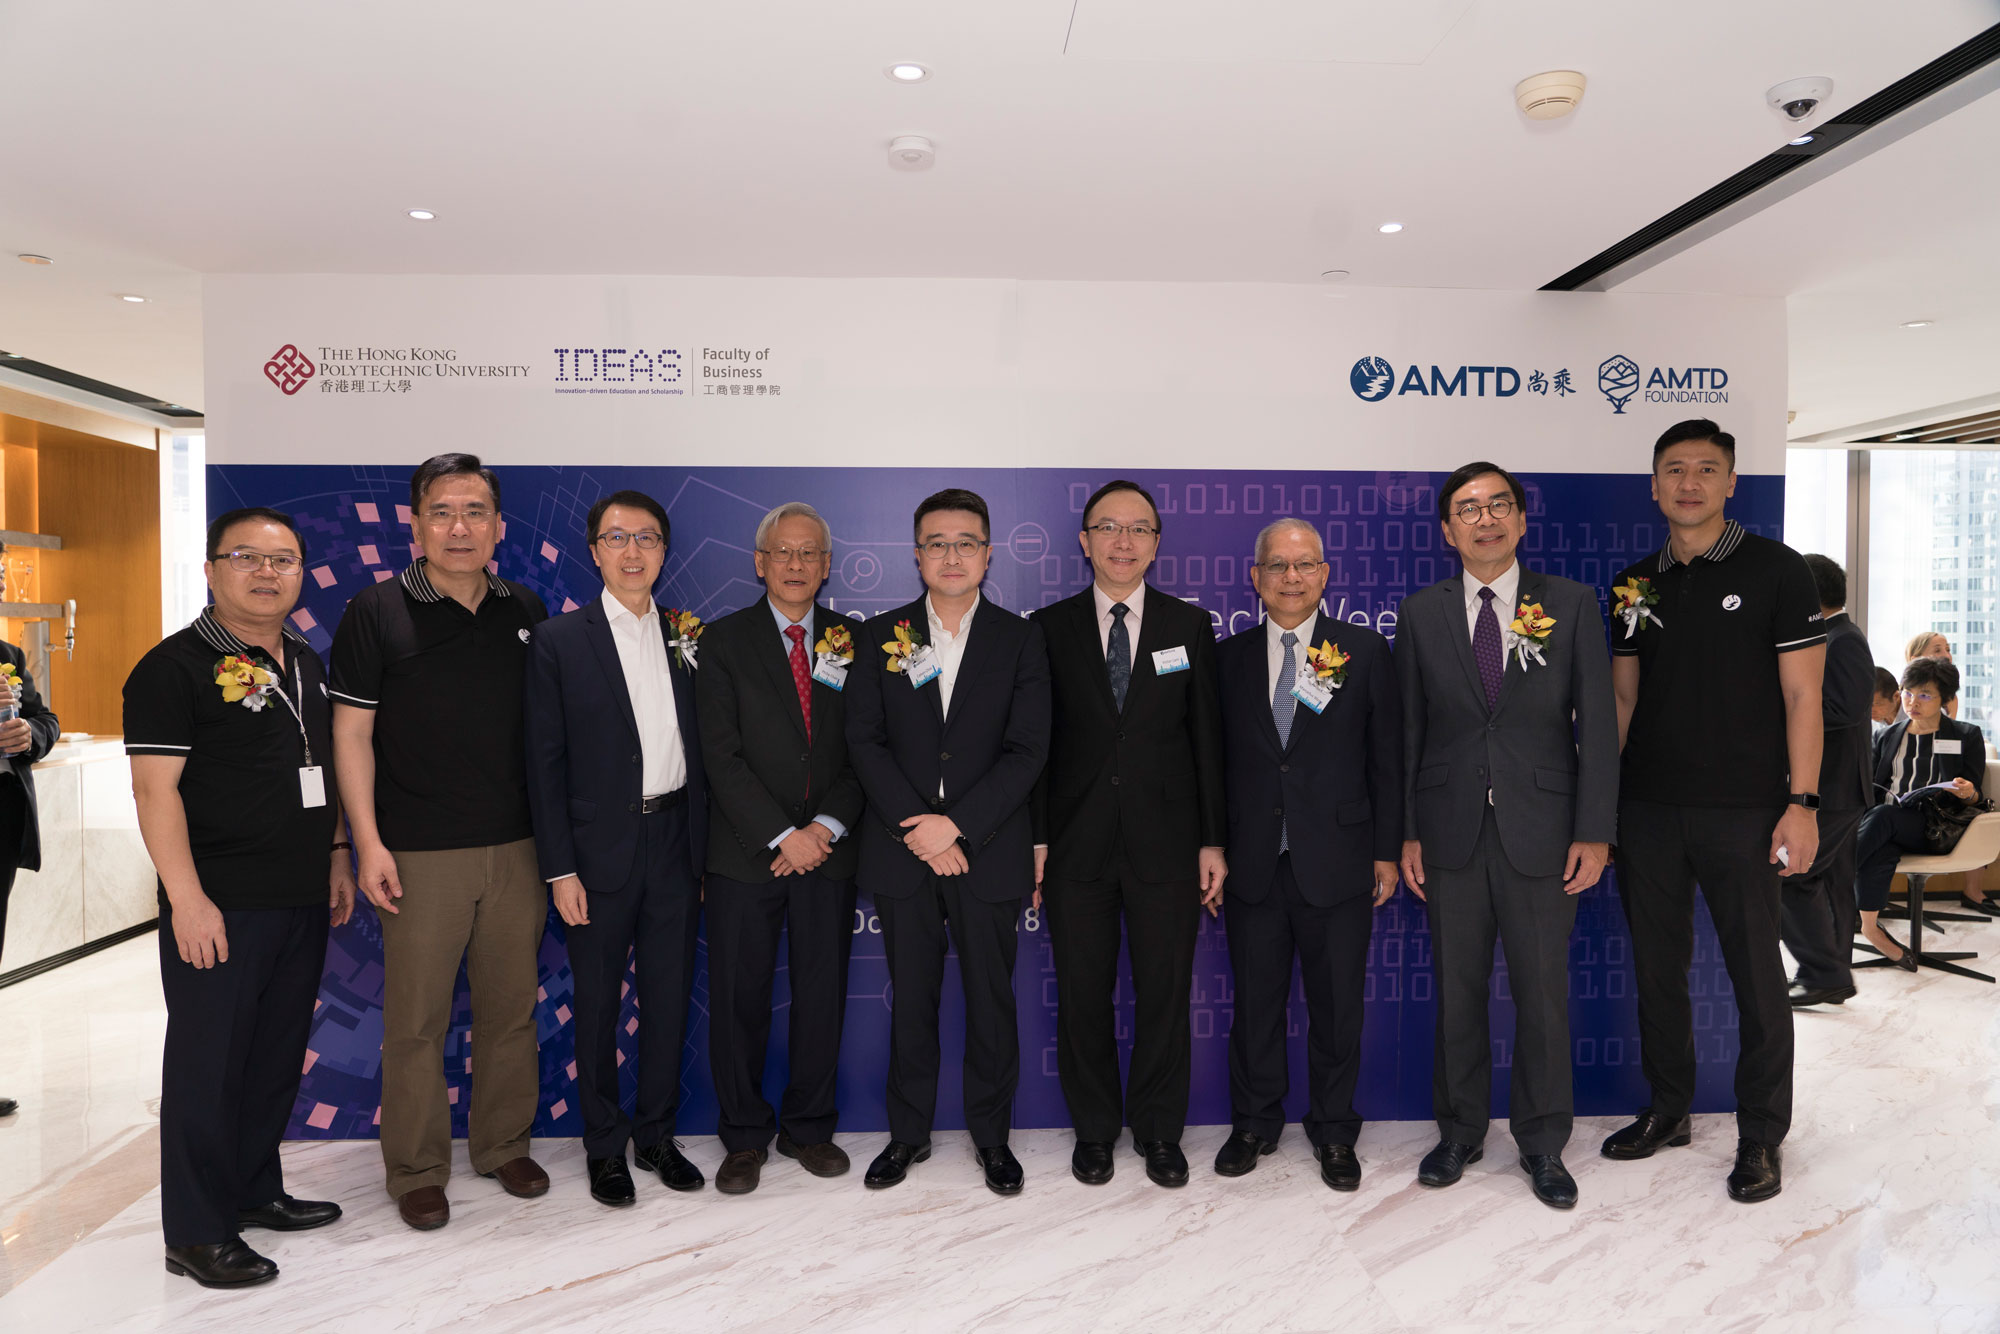 Mr. Victor Lam, Government Chief Information Officer (6th left), in group photo with Mr. Ros Lam, Chief Strategy Officer, AMTD Group, Mr. Yat Kin Sin, Chief of Staff, AMTD Group, Mr. Raymond Yung, CEO, LR Capital Group; Vice Chairman, Global Advisory Committee, AMTD Group, Prof. Philip Chan, Deputy President and Provost of PolyU, Mr. Calvin Choi, Chairman and President, AMTD Group (from 1st left to 5th left), Mr. Marcellus Wong, Vice Chairman, AMTD Group, Prof. Edwin Cheng, Dean of Faculty of Business of PolyU and Mr. Philip Yau, CFO, AMTD Group (from 7th left to right).